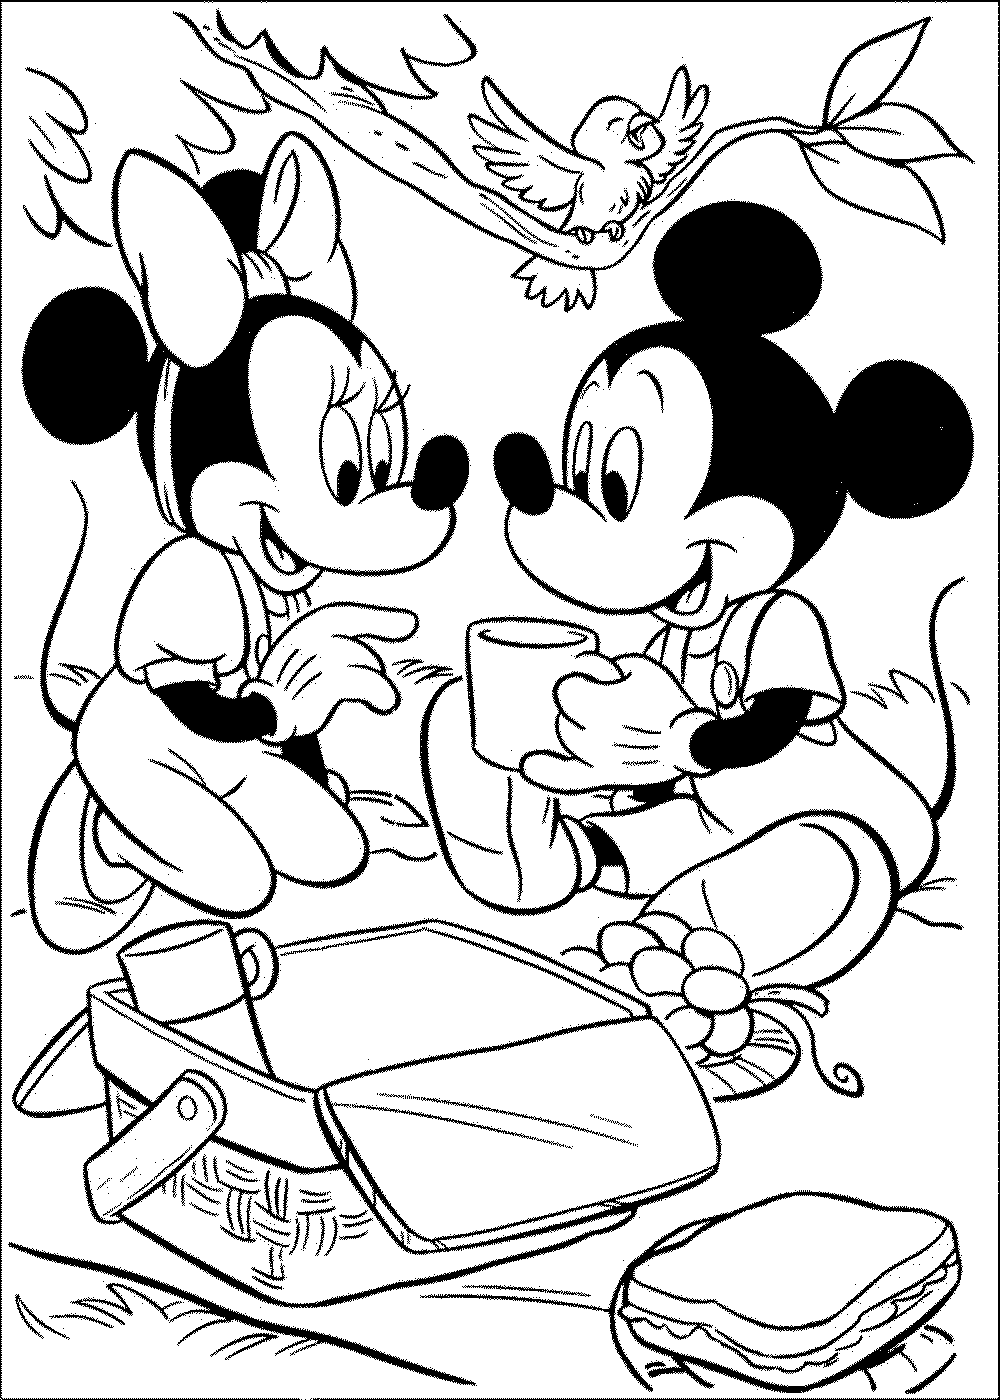 minnie-and-mickey-mouse-coloring-pages | | BestAppsForKids.com